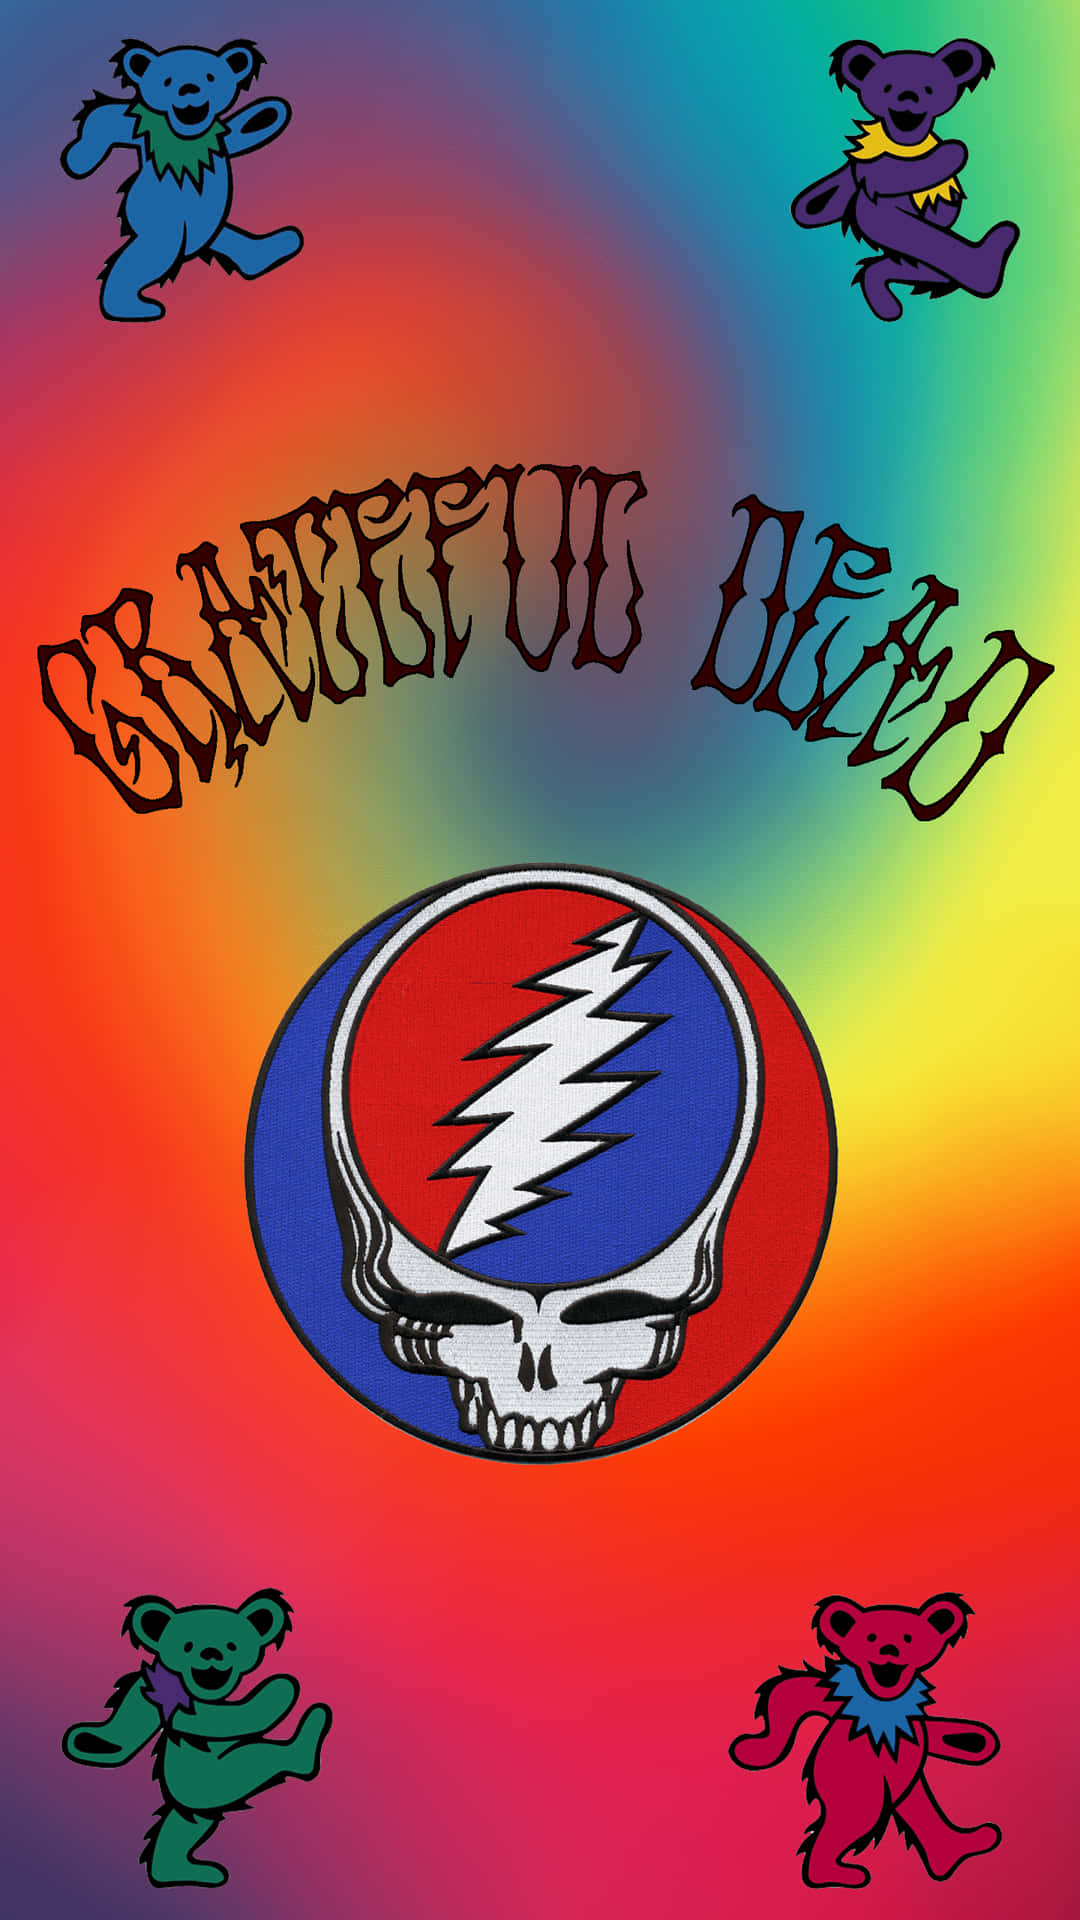 Enjoy the Grateful Dead in style with your iPhone Wallpaper